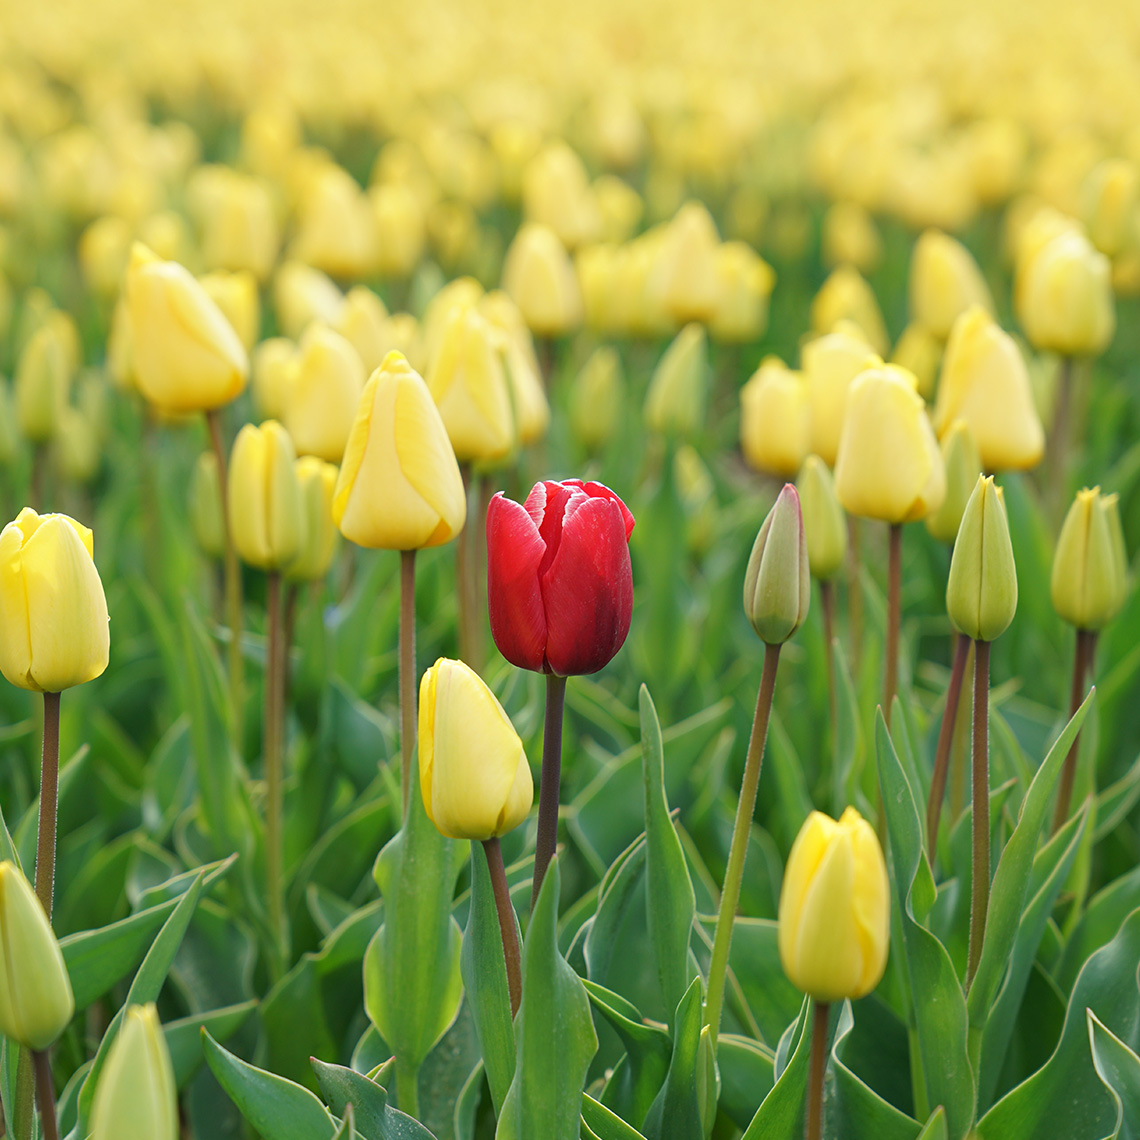 One red tulip in a field of yellow tulips